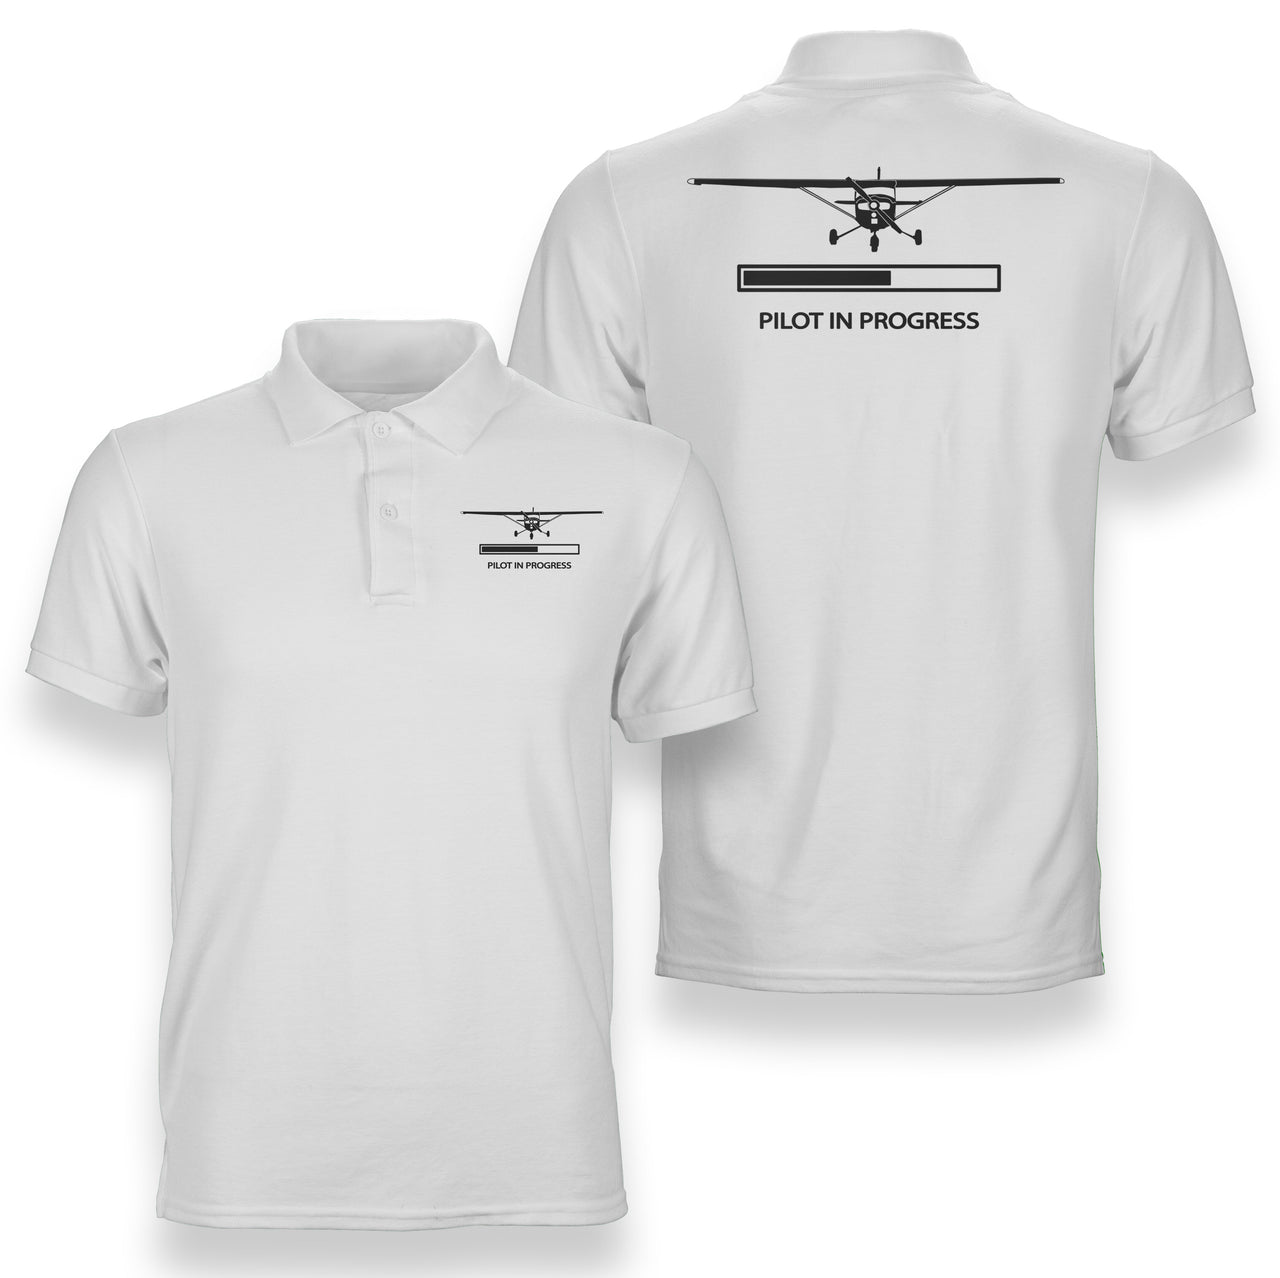 Pilot In Progress (Cessna) Designed Double Side Polo T-Shirts